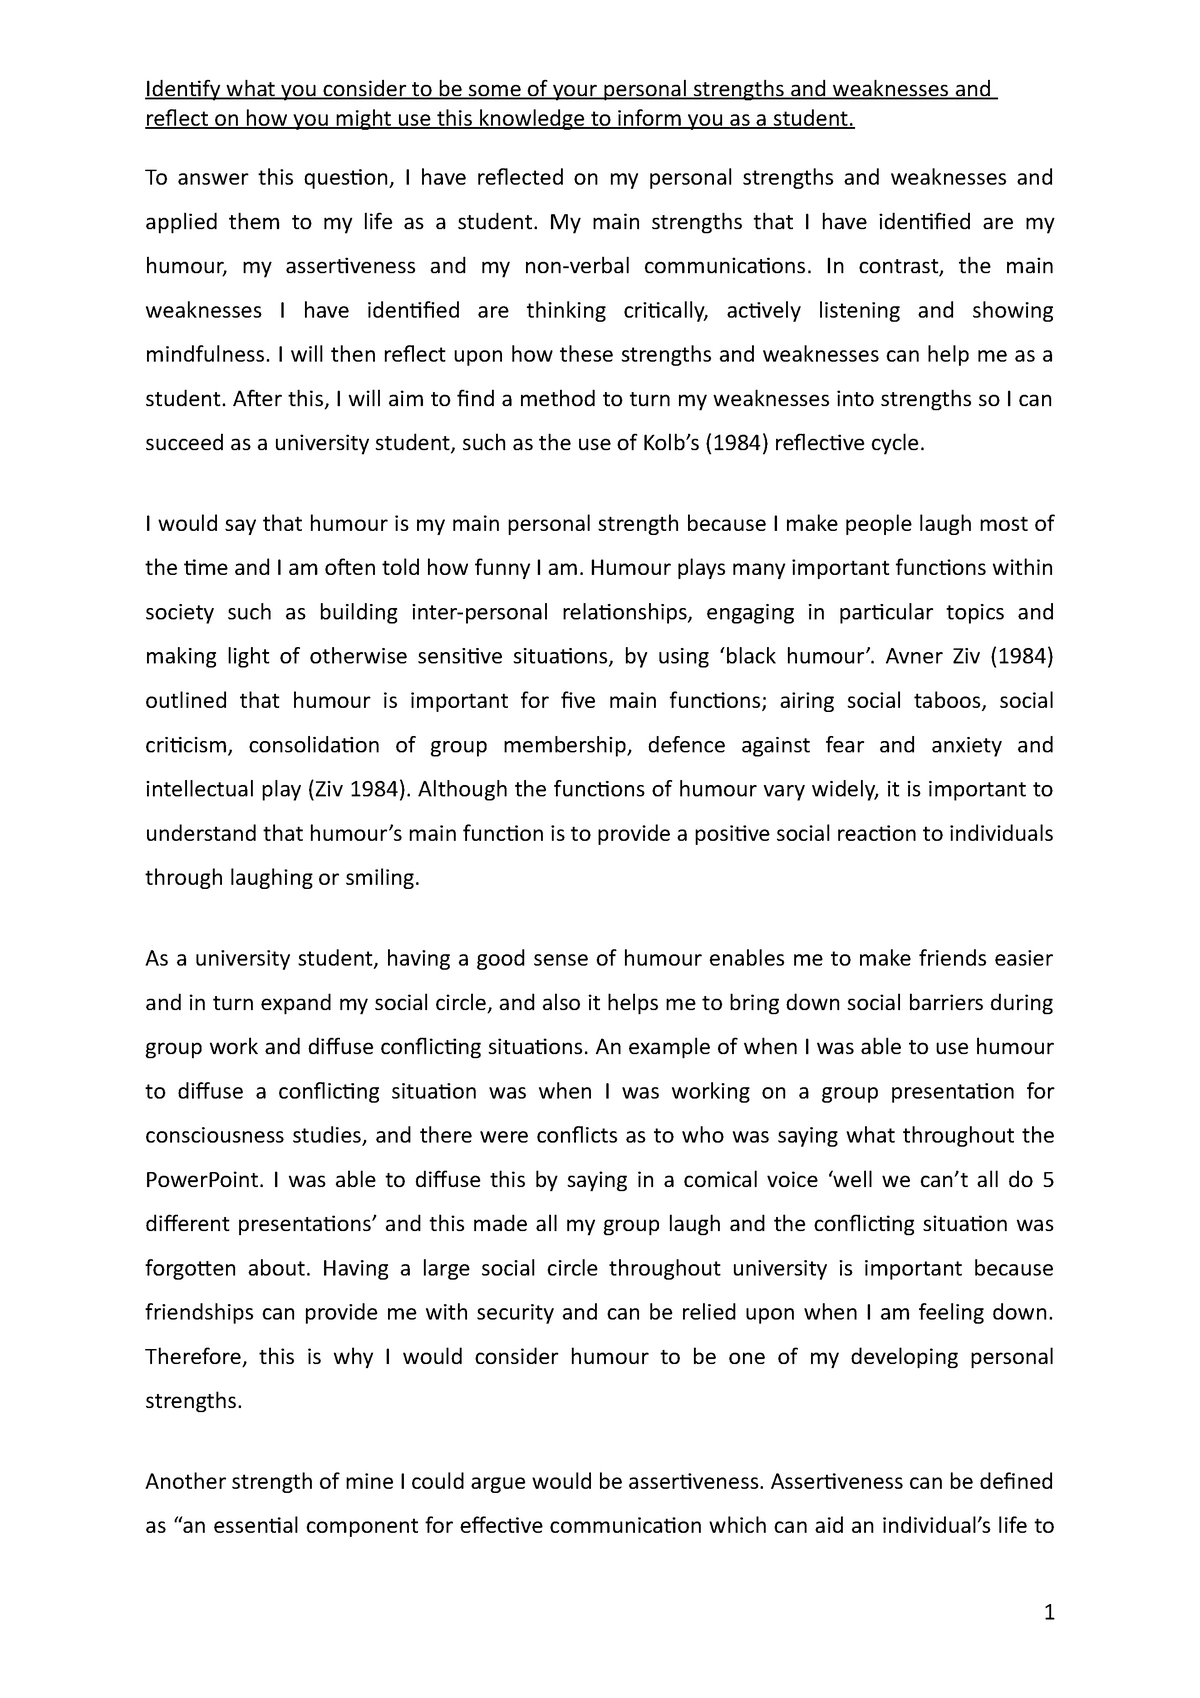 self reflection strengths and weaknesses essay brainly